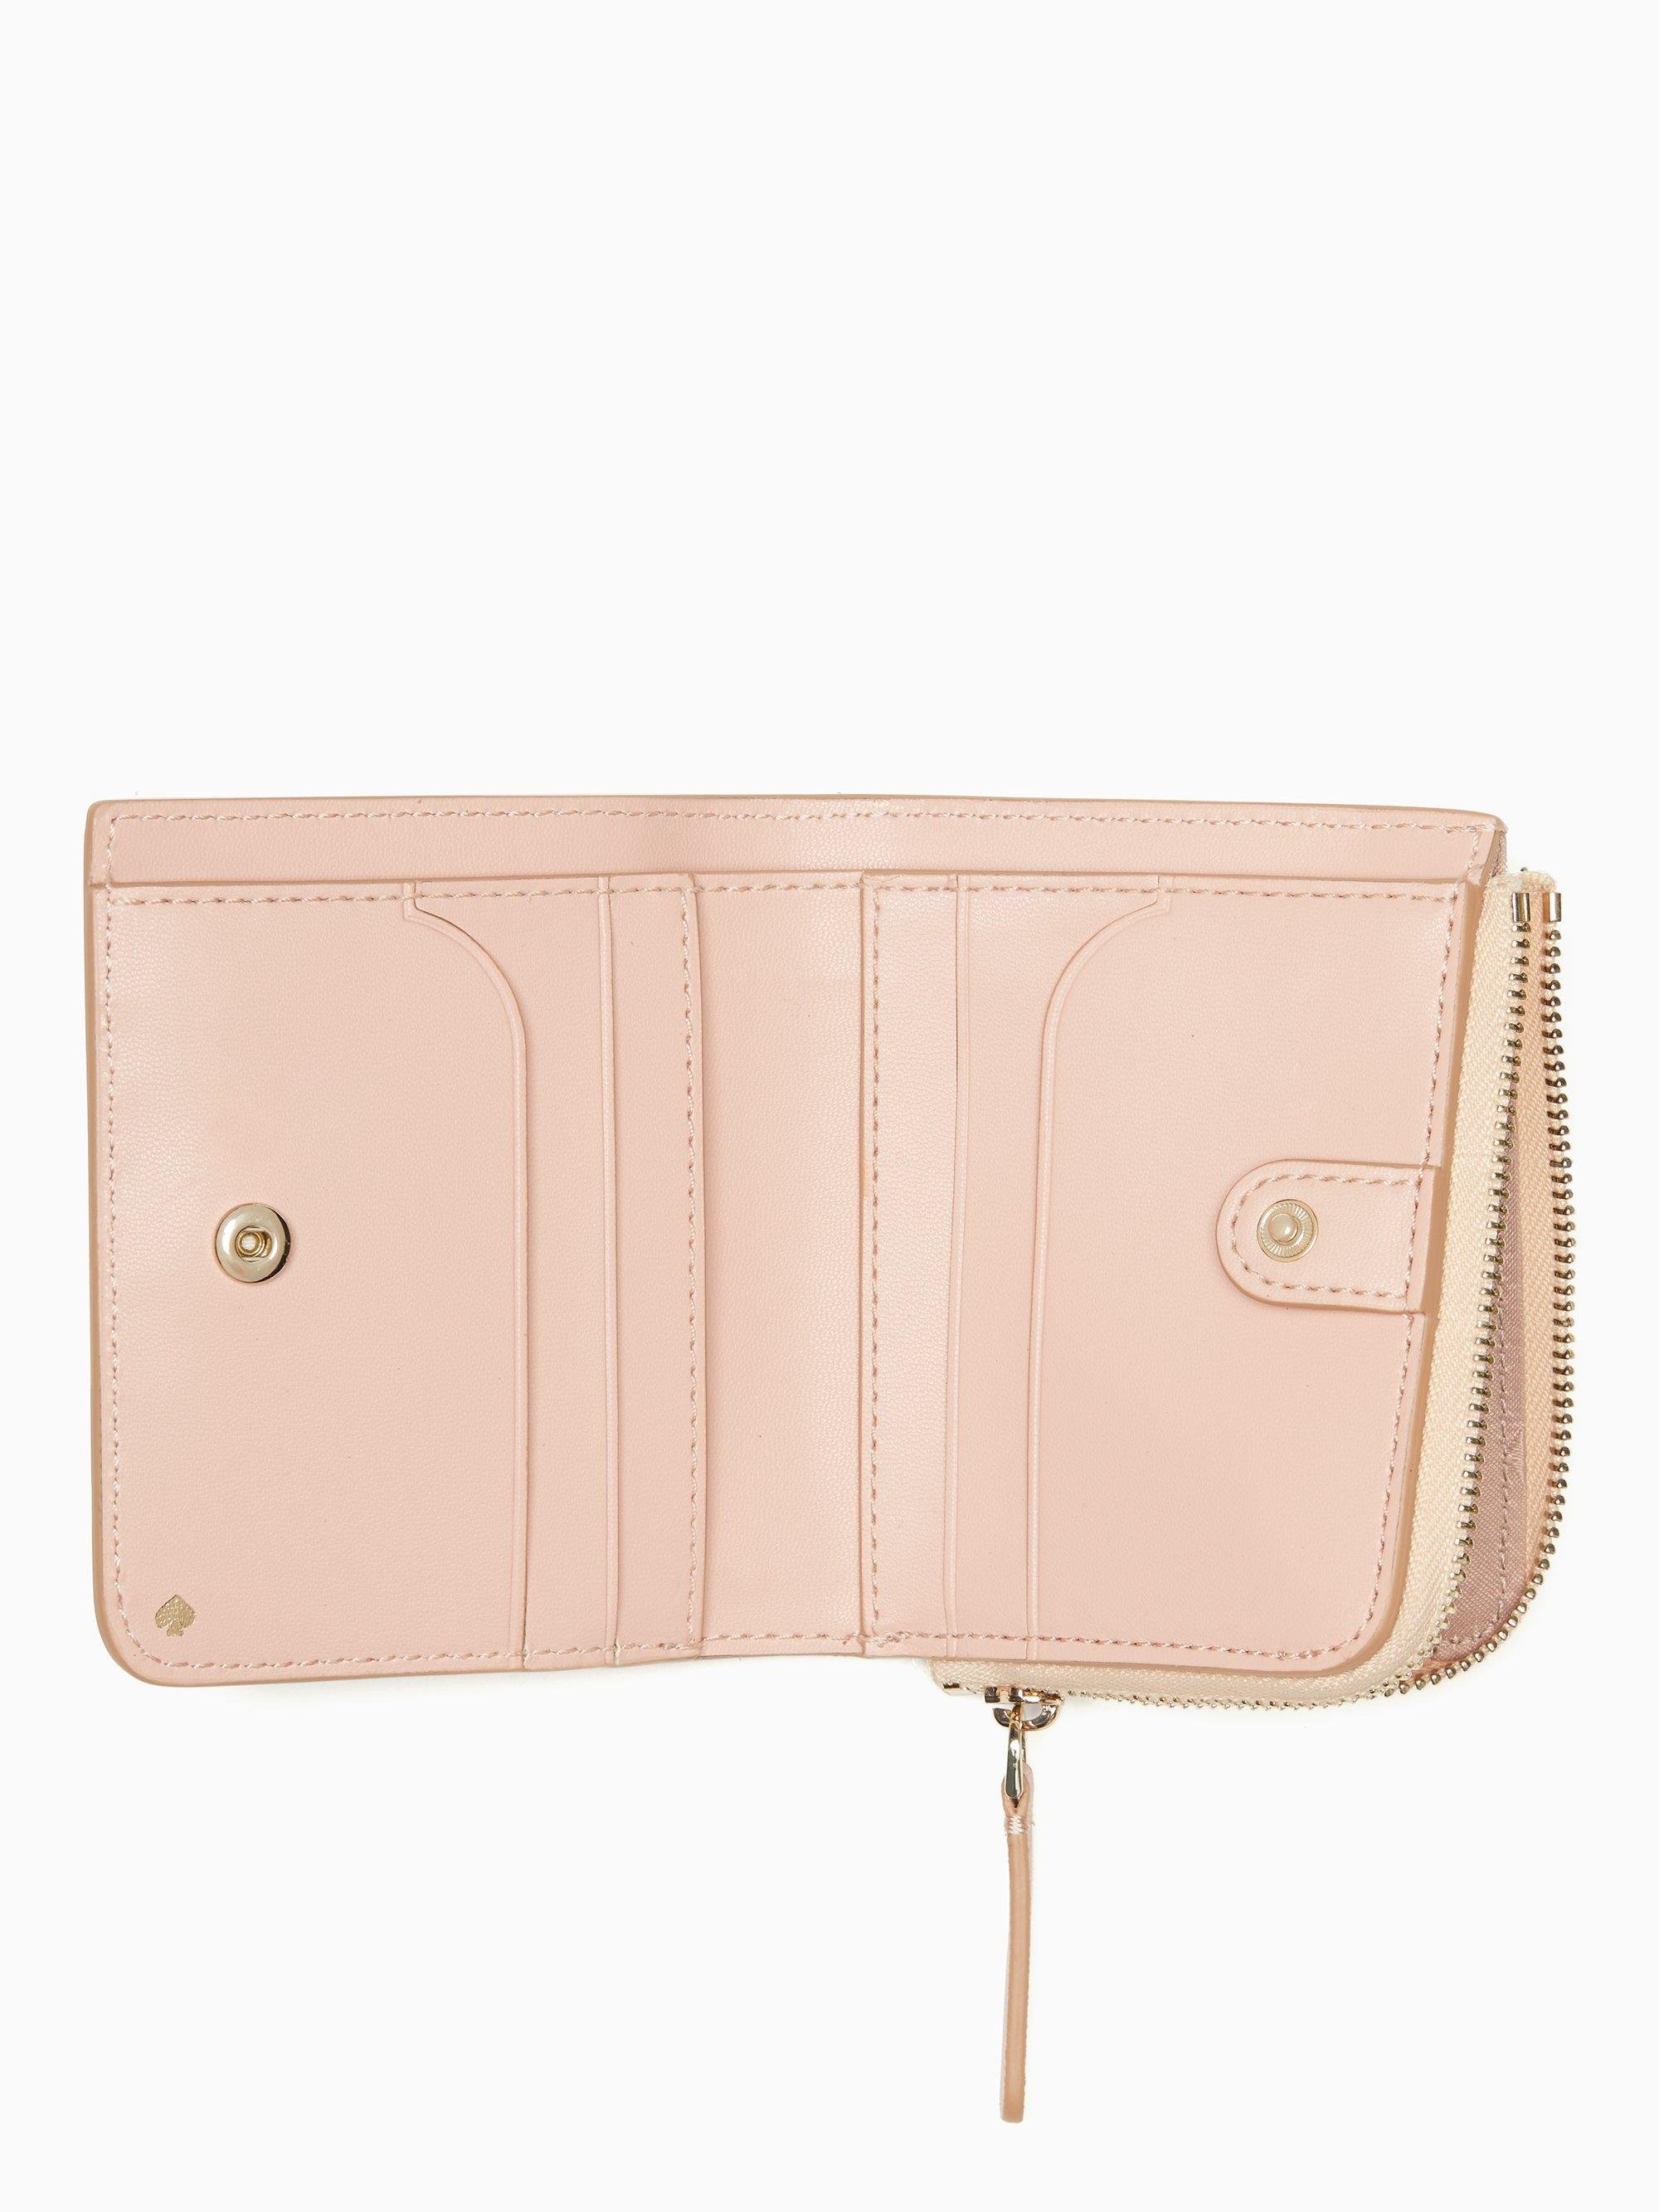 Kate Spade Joeley Boxed Small L-zip Bifold Wallet in Rose Gold 